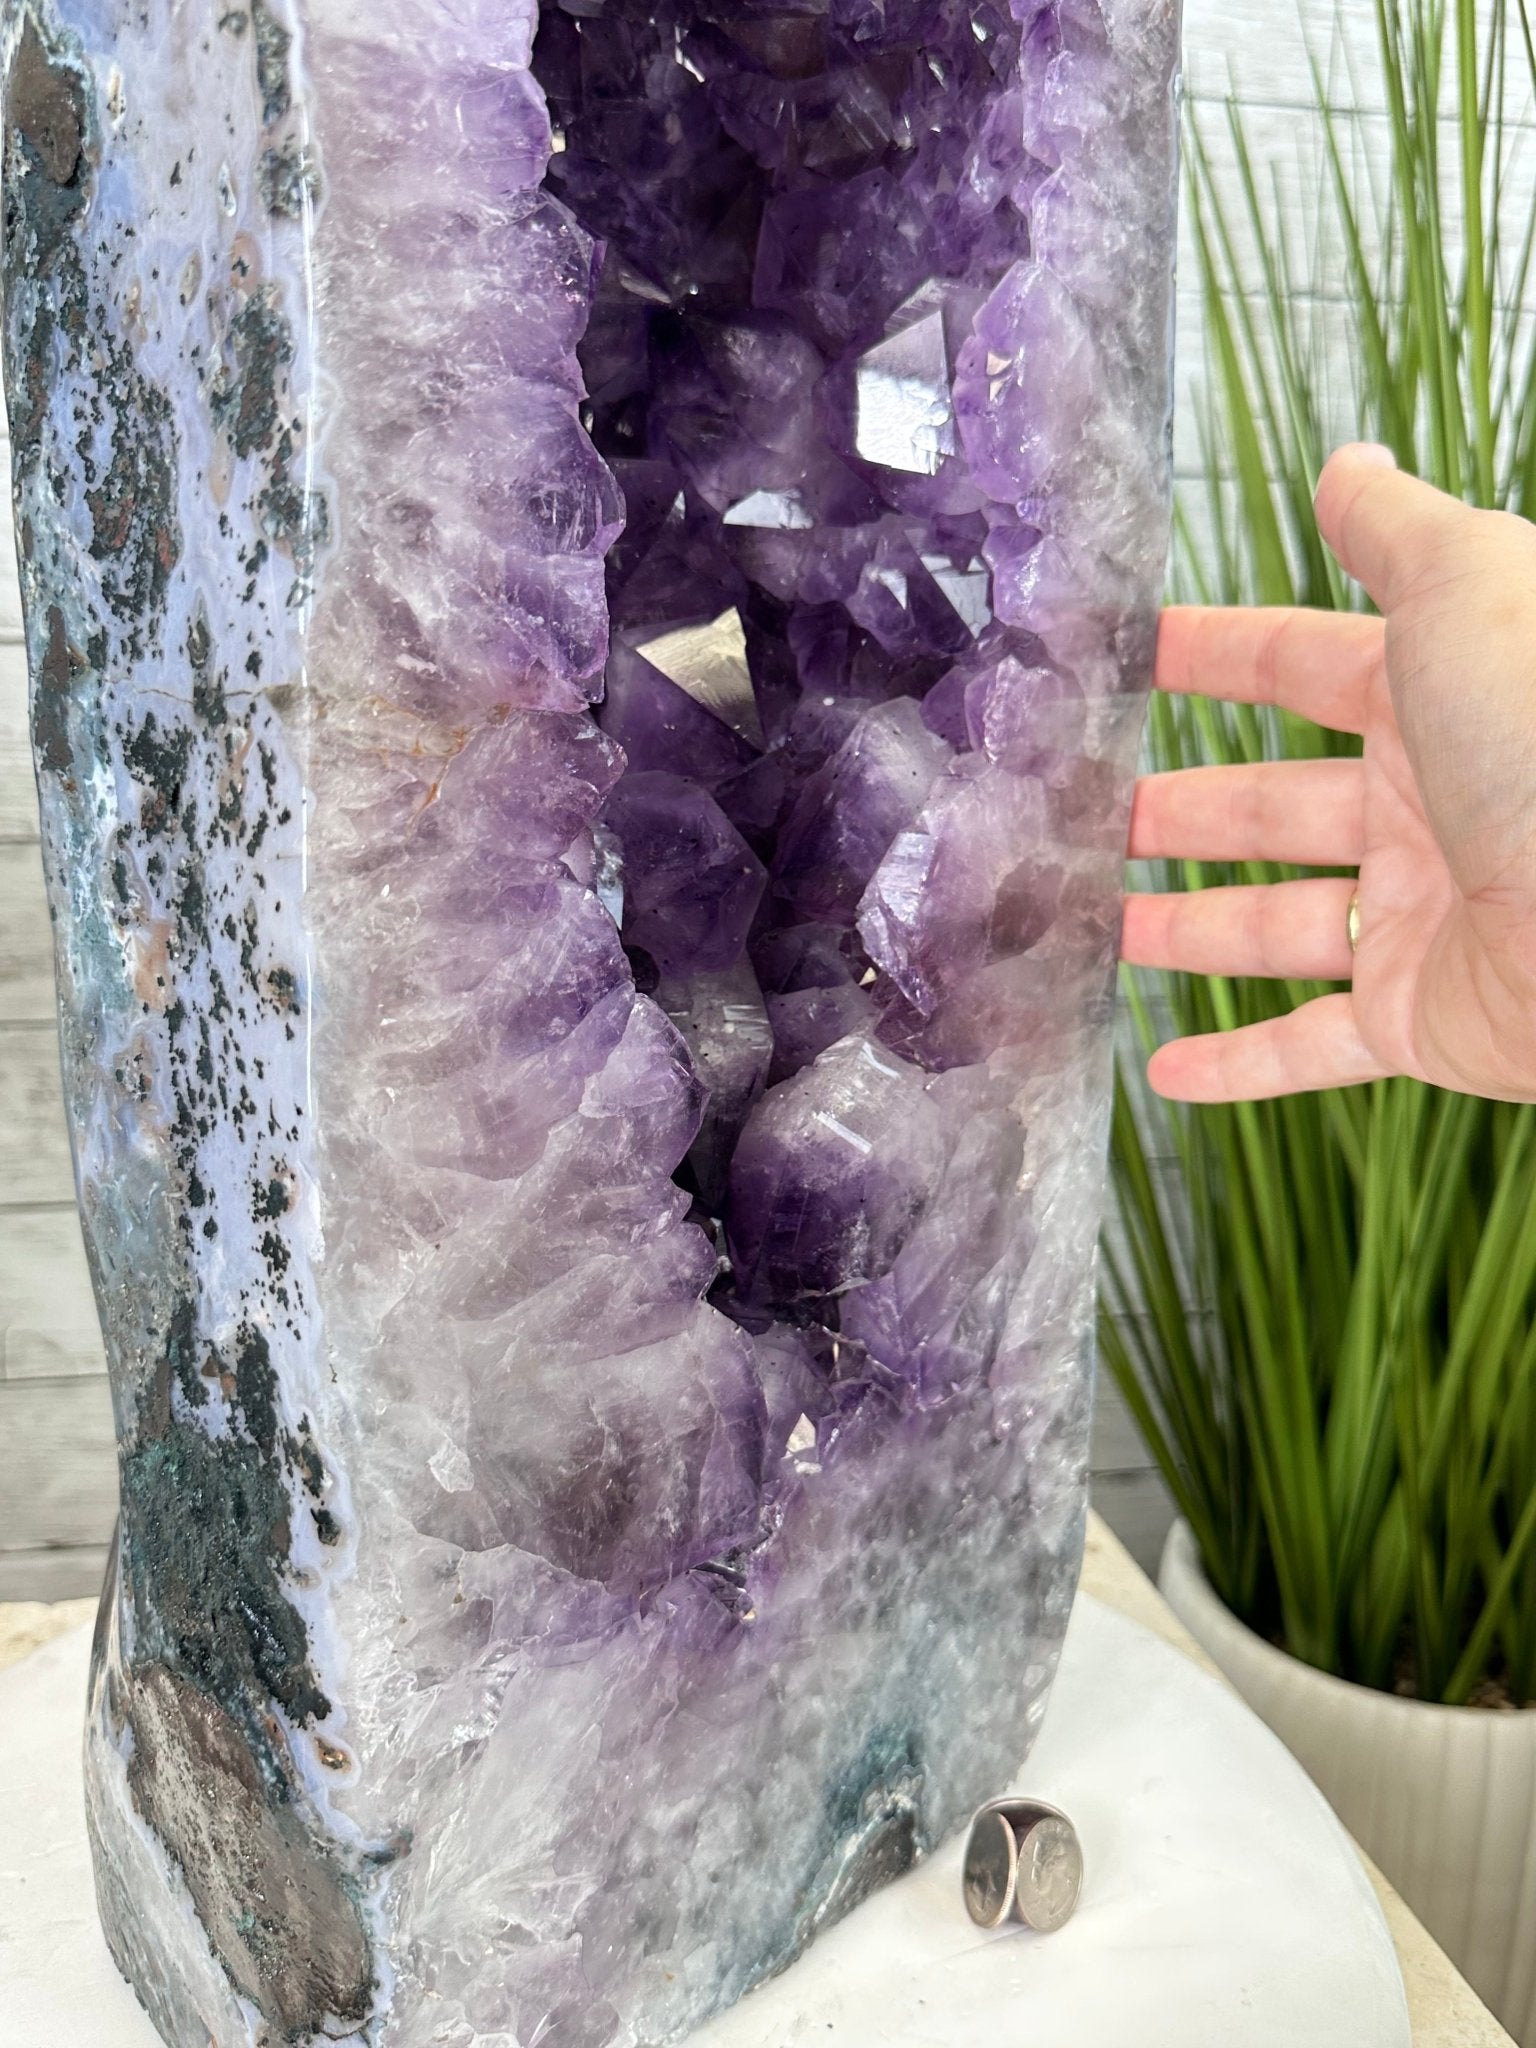 Extra Plus Quality Polished Brazilian Amethyst Cathedral, 90.7 lbs & 32.75" tall Model #5602-0137 by Brazil Gems - Brazil GemsBrazil GemsExtra Plus Quality Polished Brazilian Amethyst Cathedral, 90.7 lbs & 32.75" tall Model #5602-0137 by Brazil GemsPolished Cathedrals5602-0137